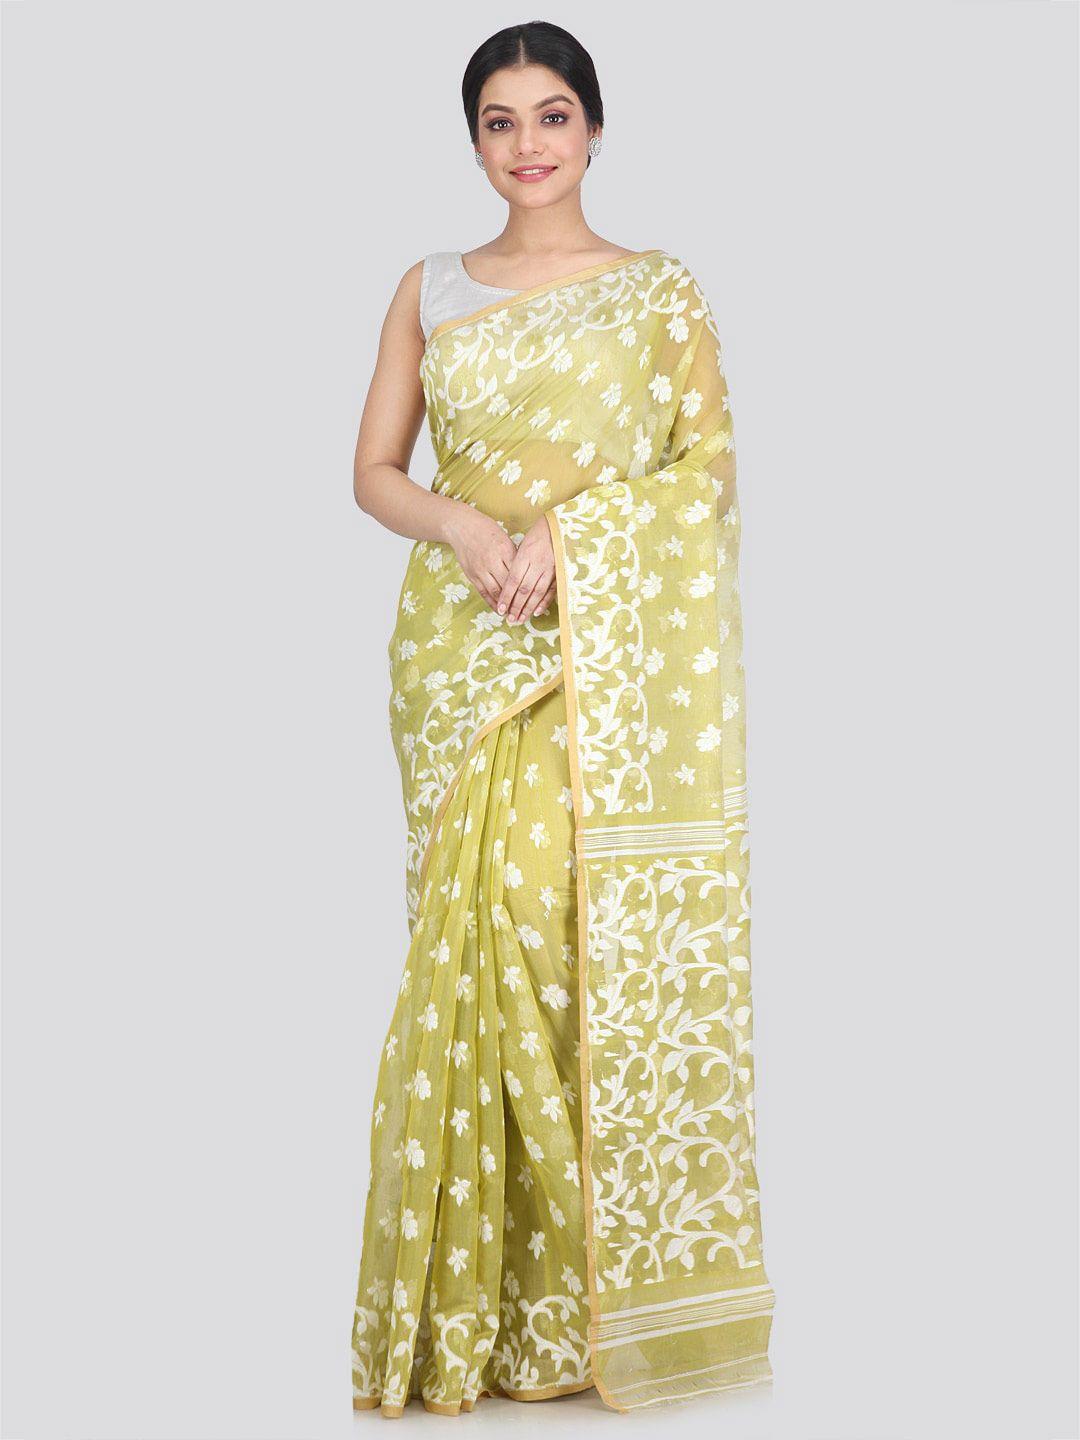 pinkloom floral woven design pure cotton saree